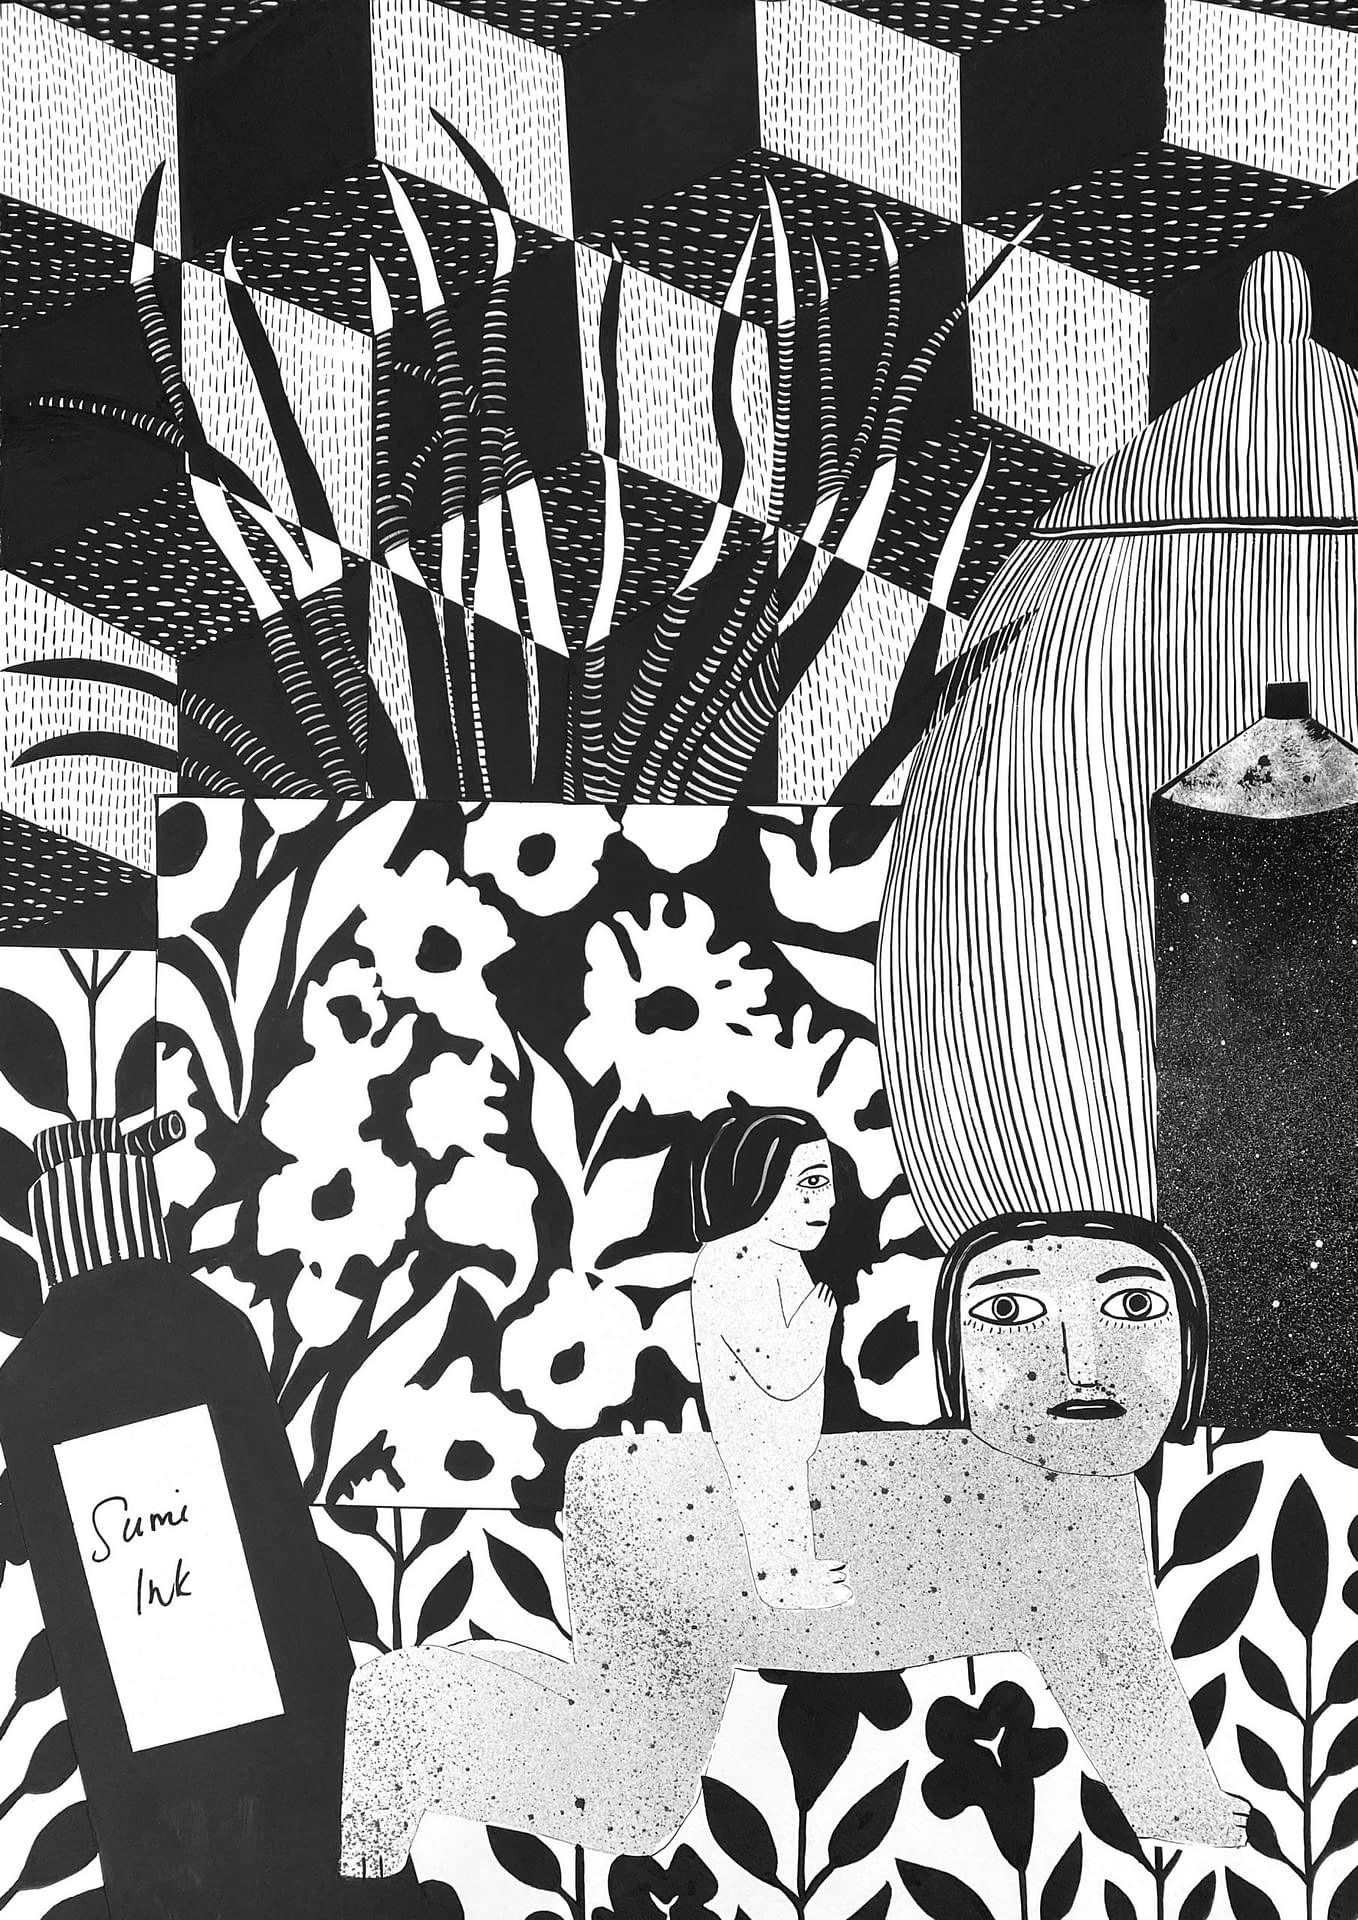 mary finlayson, joanne artman gallery, spider plant with mother and child figure, ink on arches, still life, interiors